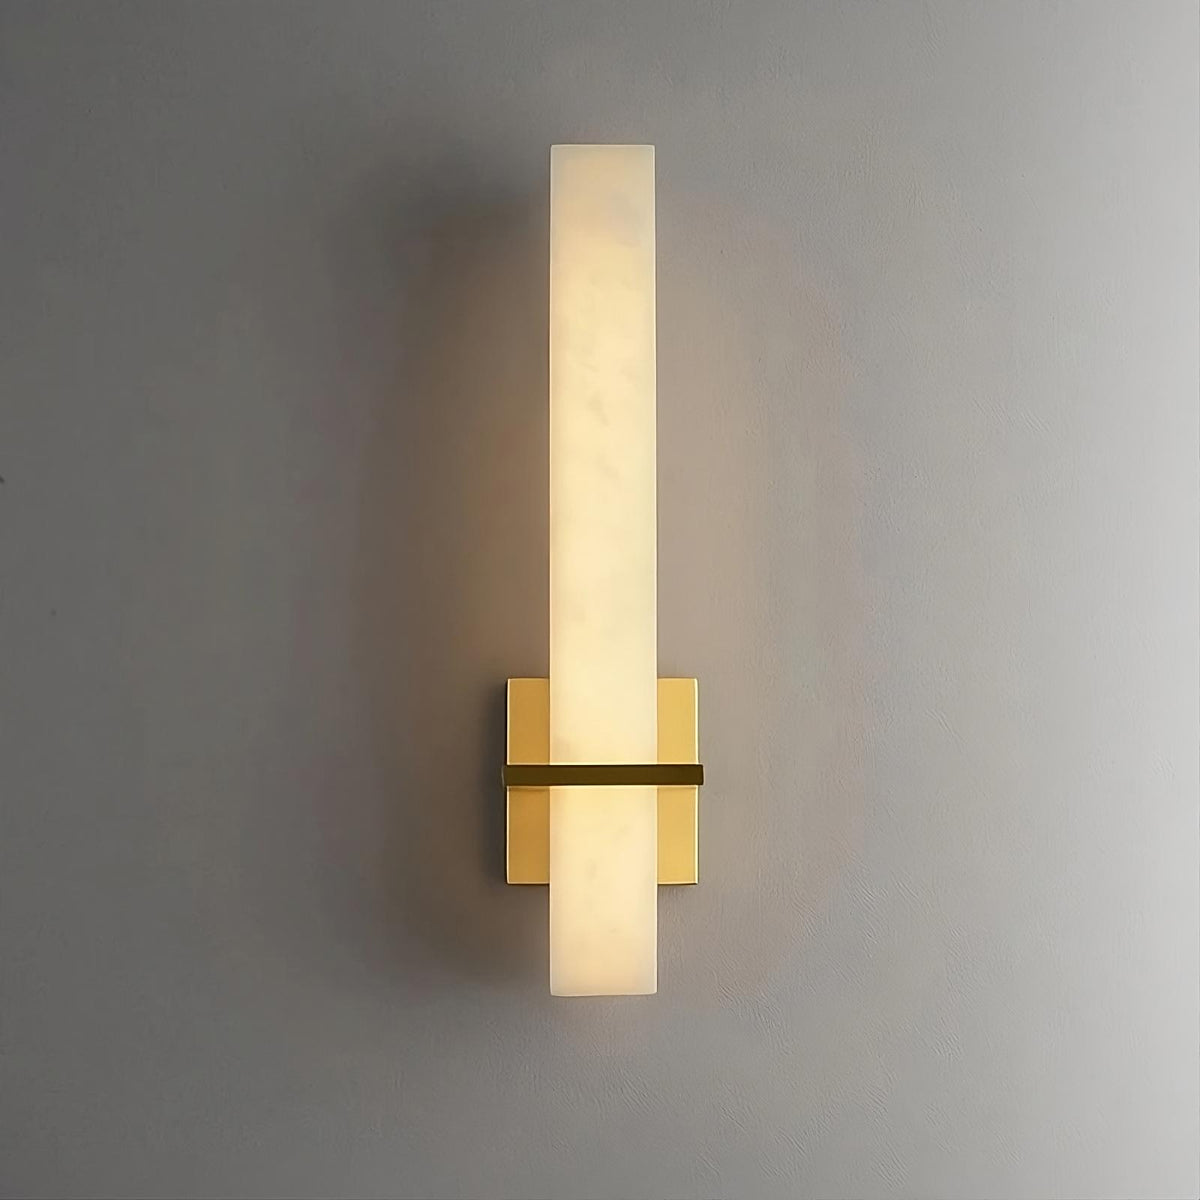 A modern wall-mounted brass light fixture with a vertical rectangular ivory-colored shade and a gold base is illuminated against a plain gray background. The Natural Marble Indoor Sconce by Morsale.com has a minimalist design, casts a soft, warm light, and exemplifies the elegance of LED indoor lighting.